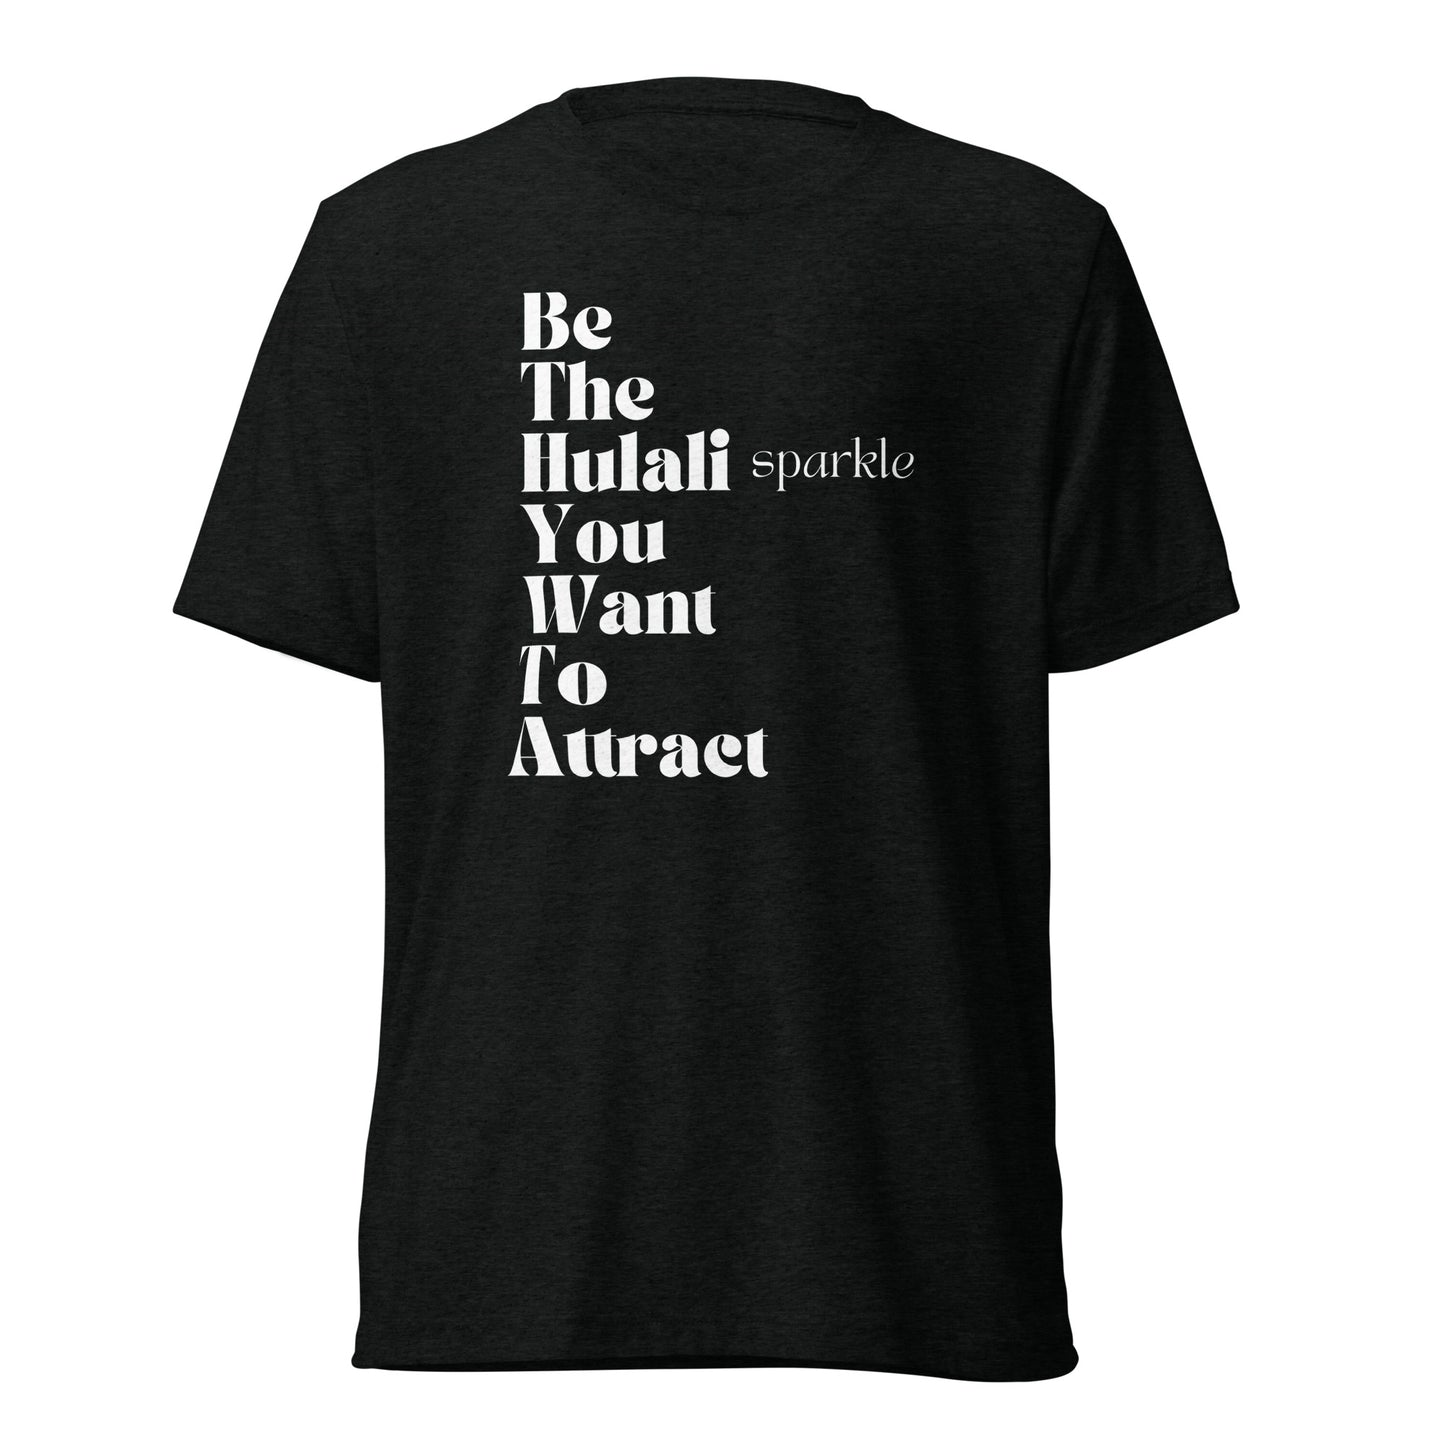 Be the hulali you want to attract short sleeve t-shirt